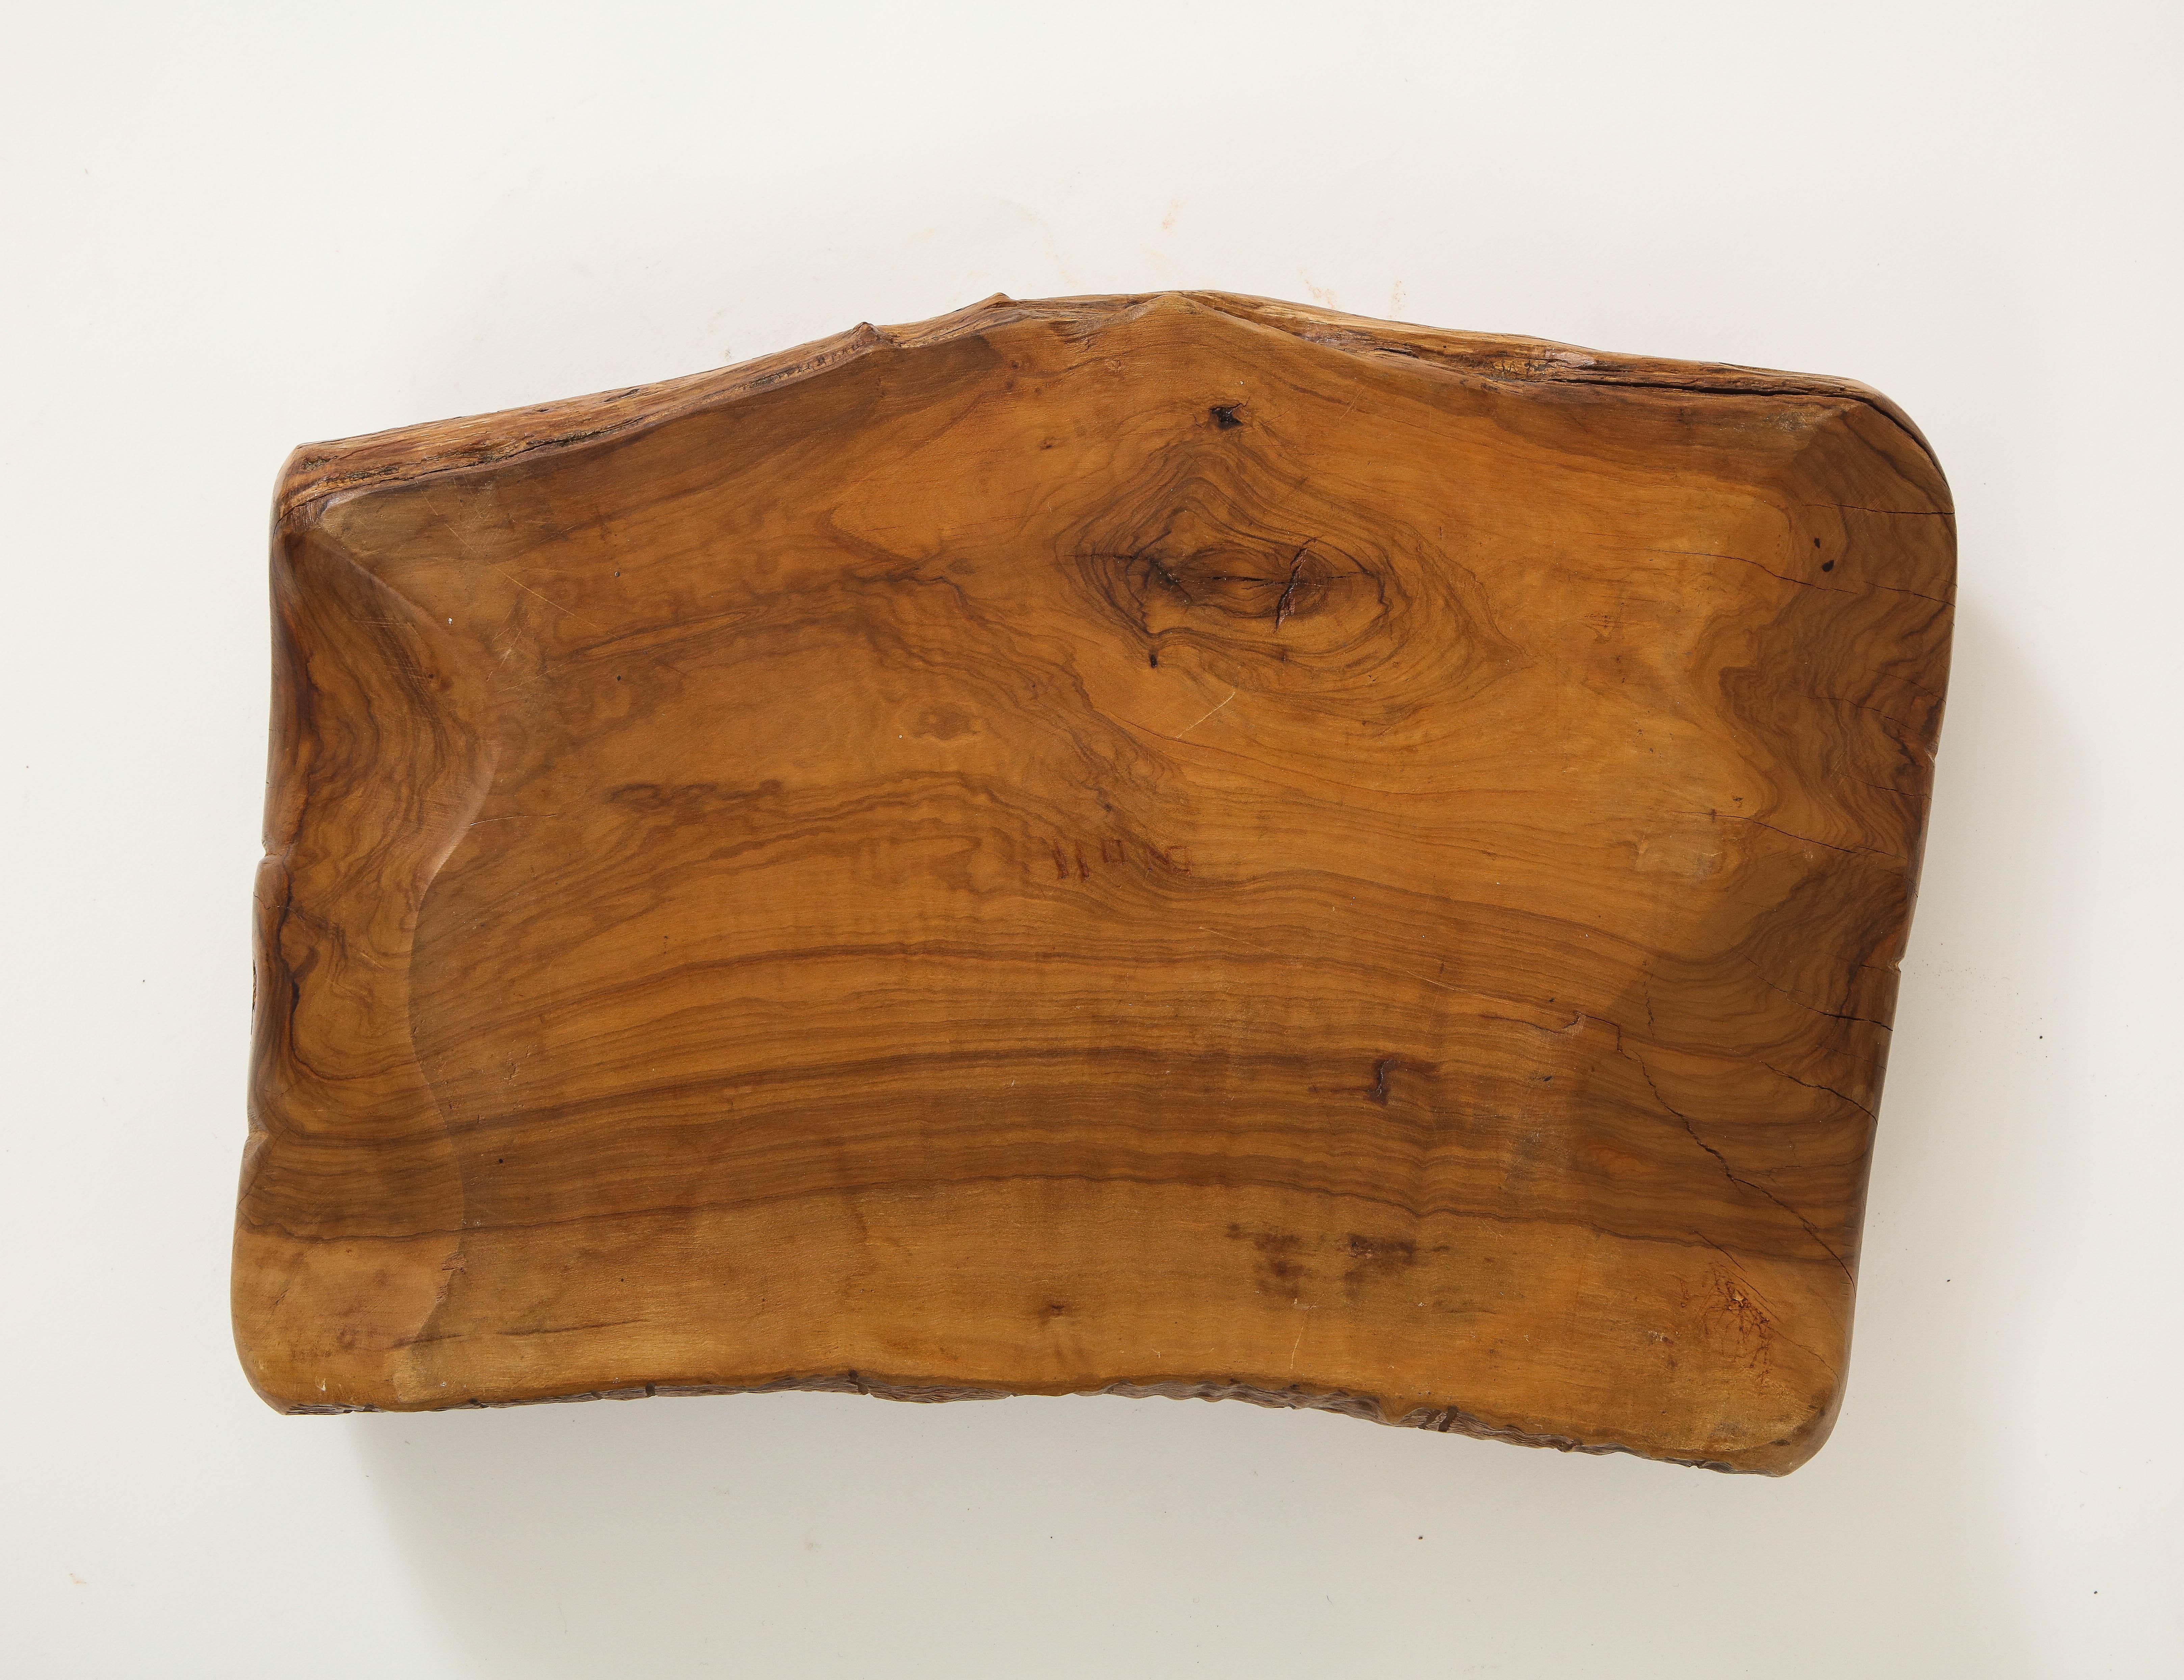 Carved Olivewood Videpoche by Alexandre Noll, France, c. 1950 'Signed'